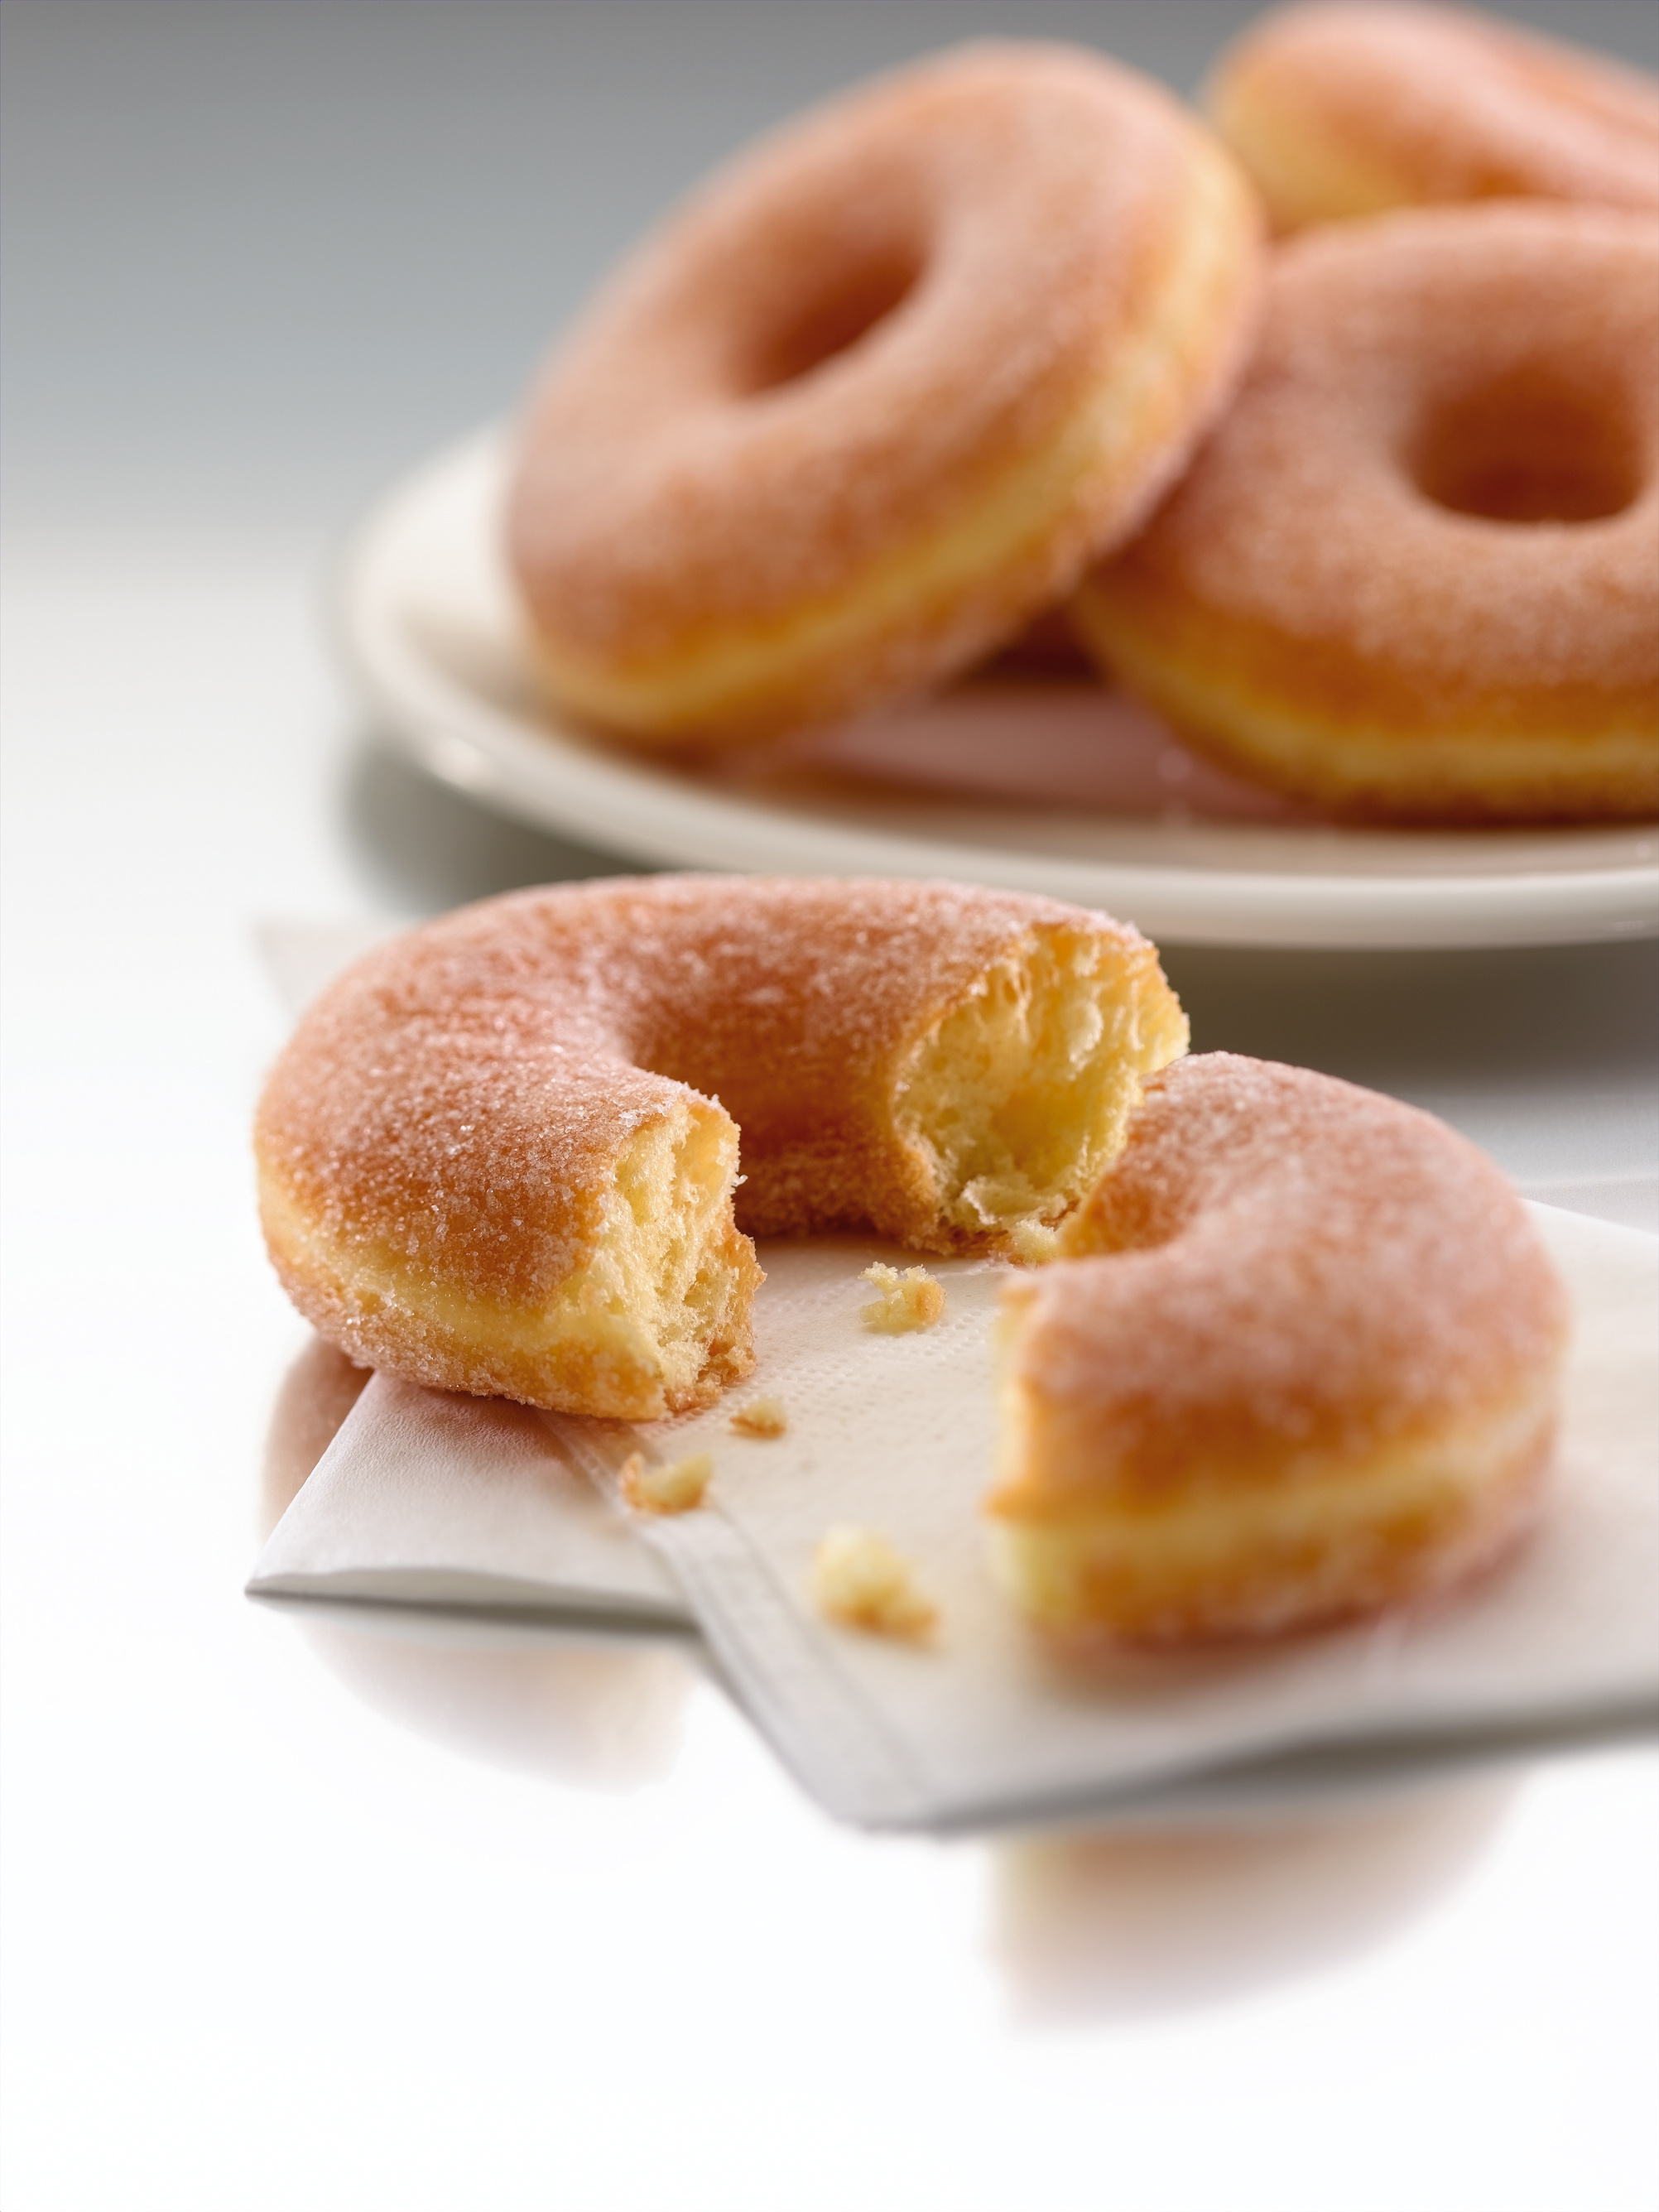 Donut: Typically shaped like a ring or, when prepared with a filling, a ball. 2010x2680 HD Wallpaper.